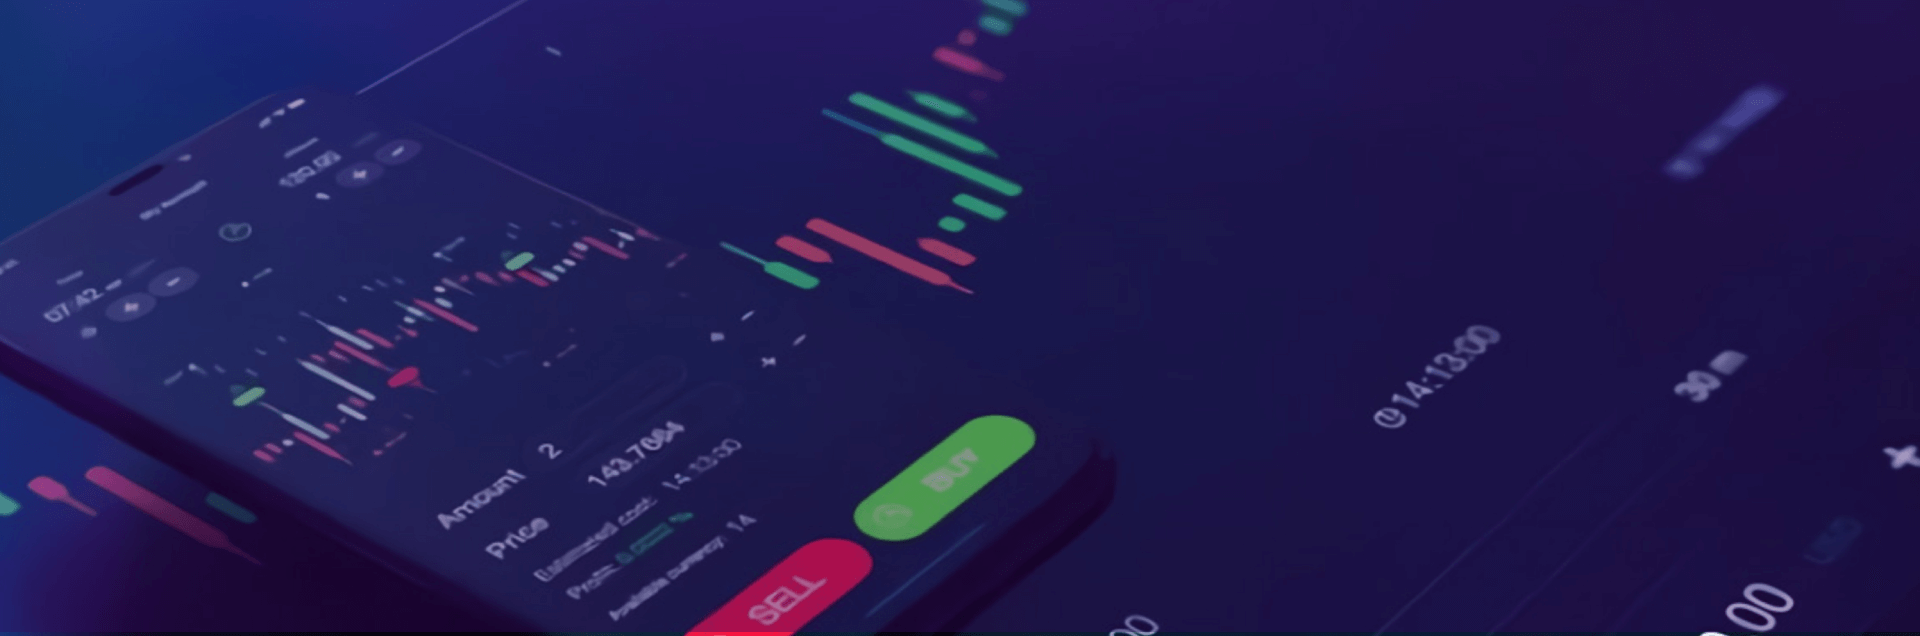 How to Start Trading on CWG Market: A Step-by-Step Guide